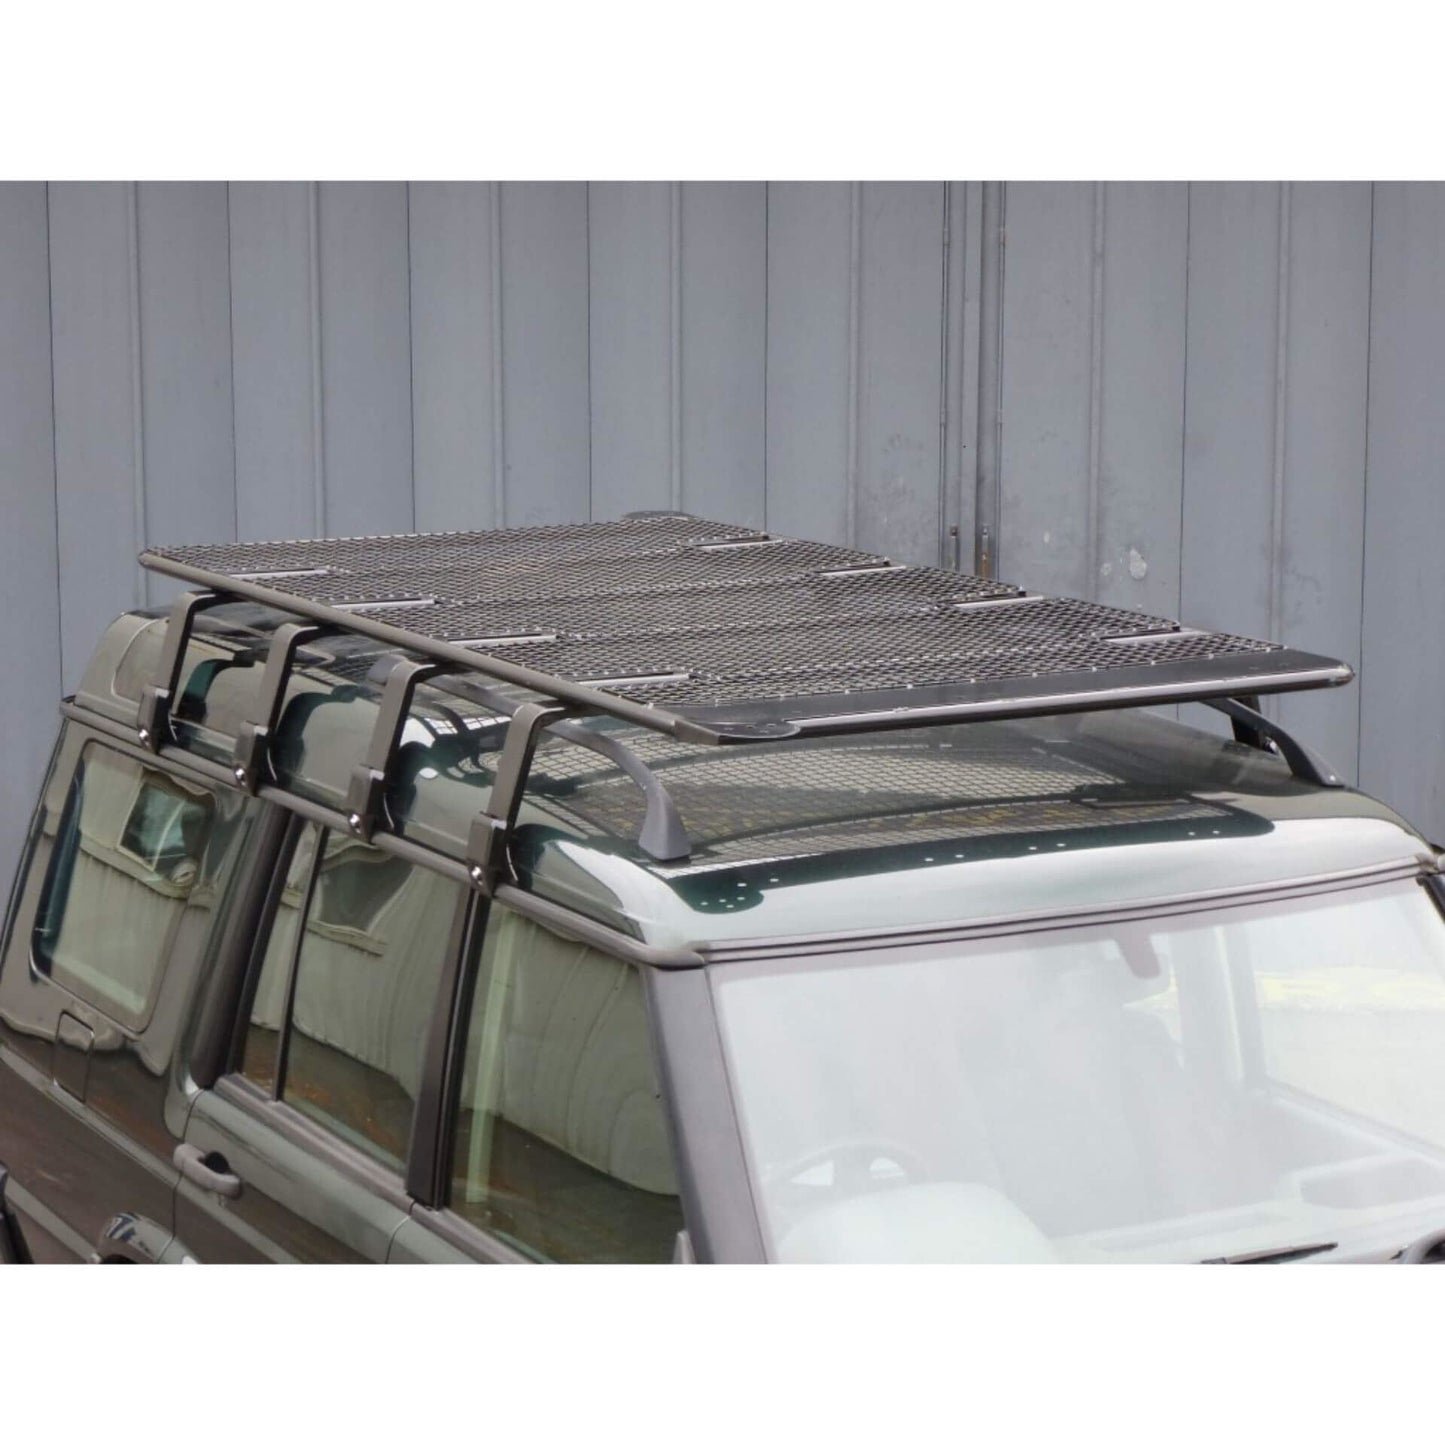 Expedition Steel Flat Roof Rack for Land Rover Discovery 1 and 2